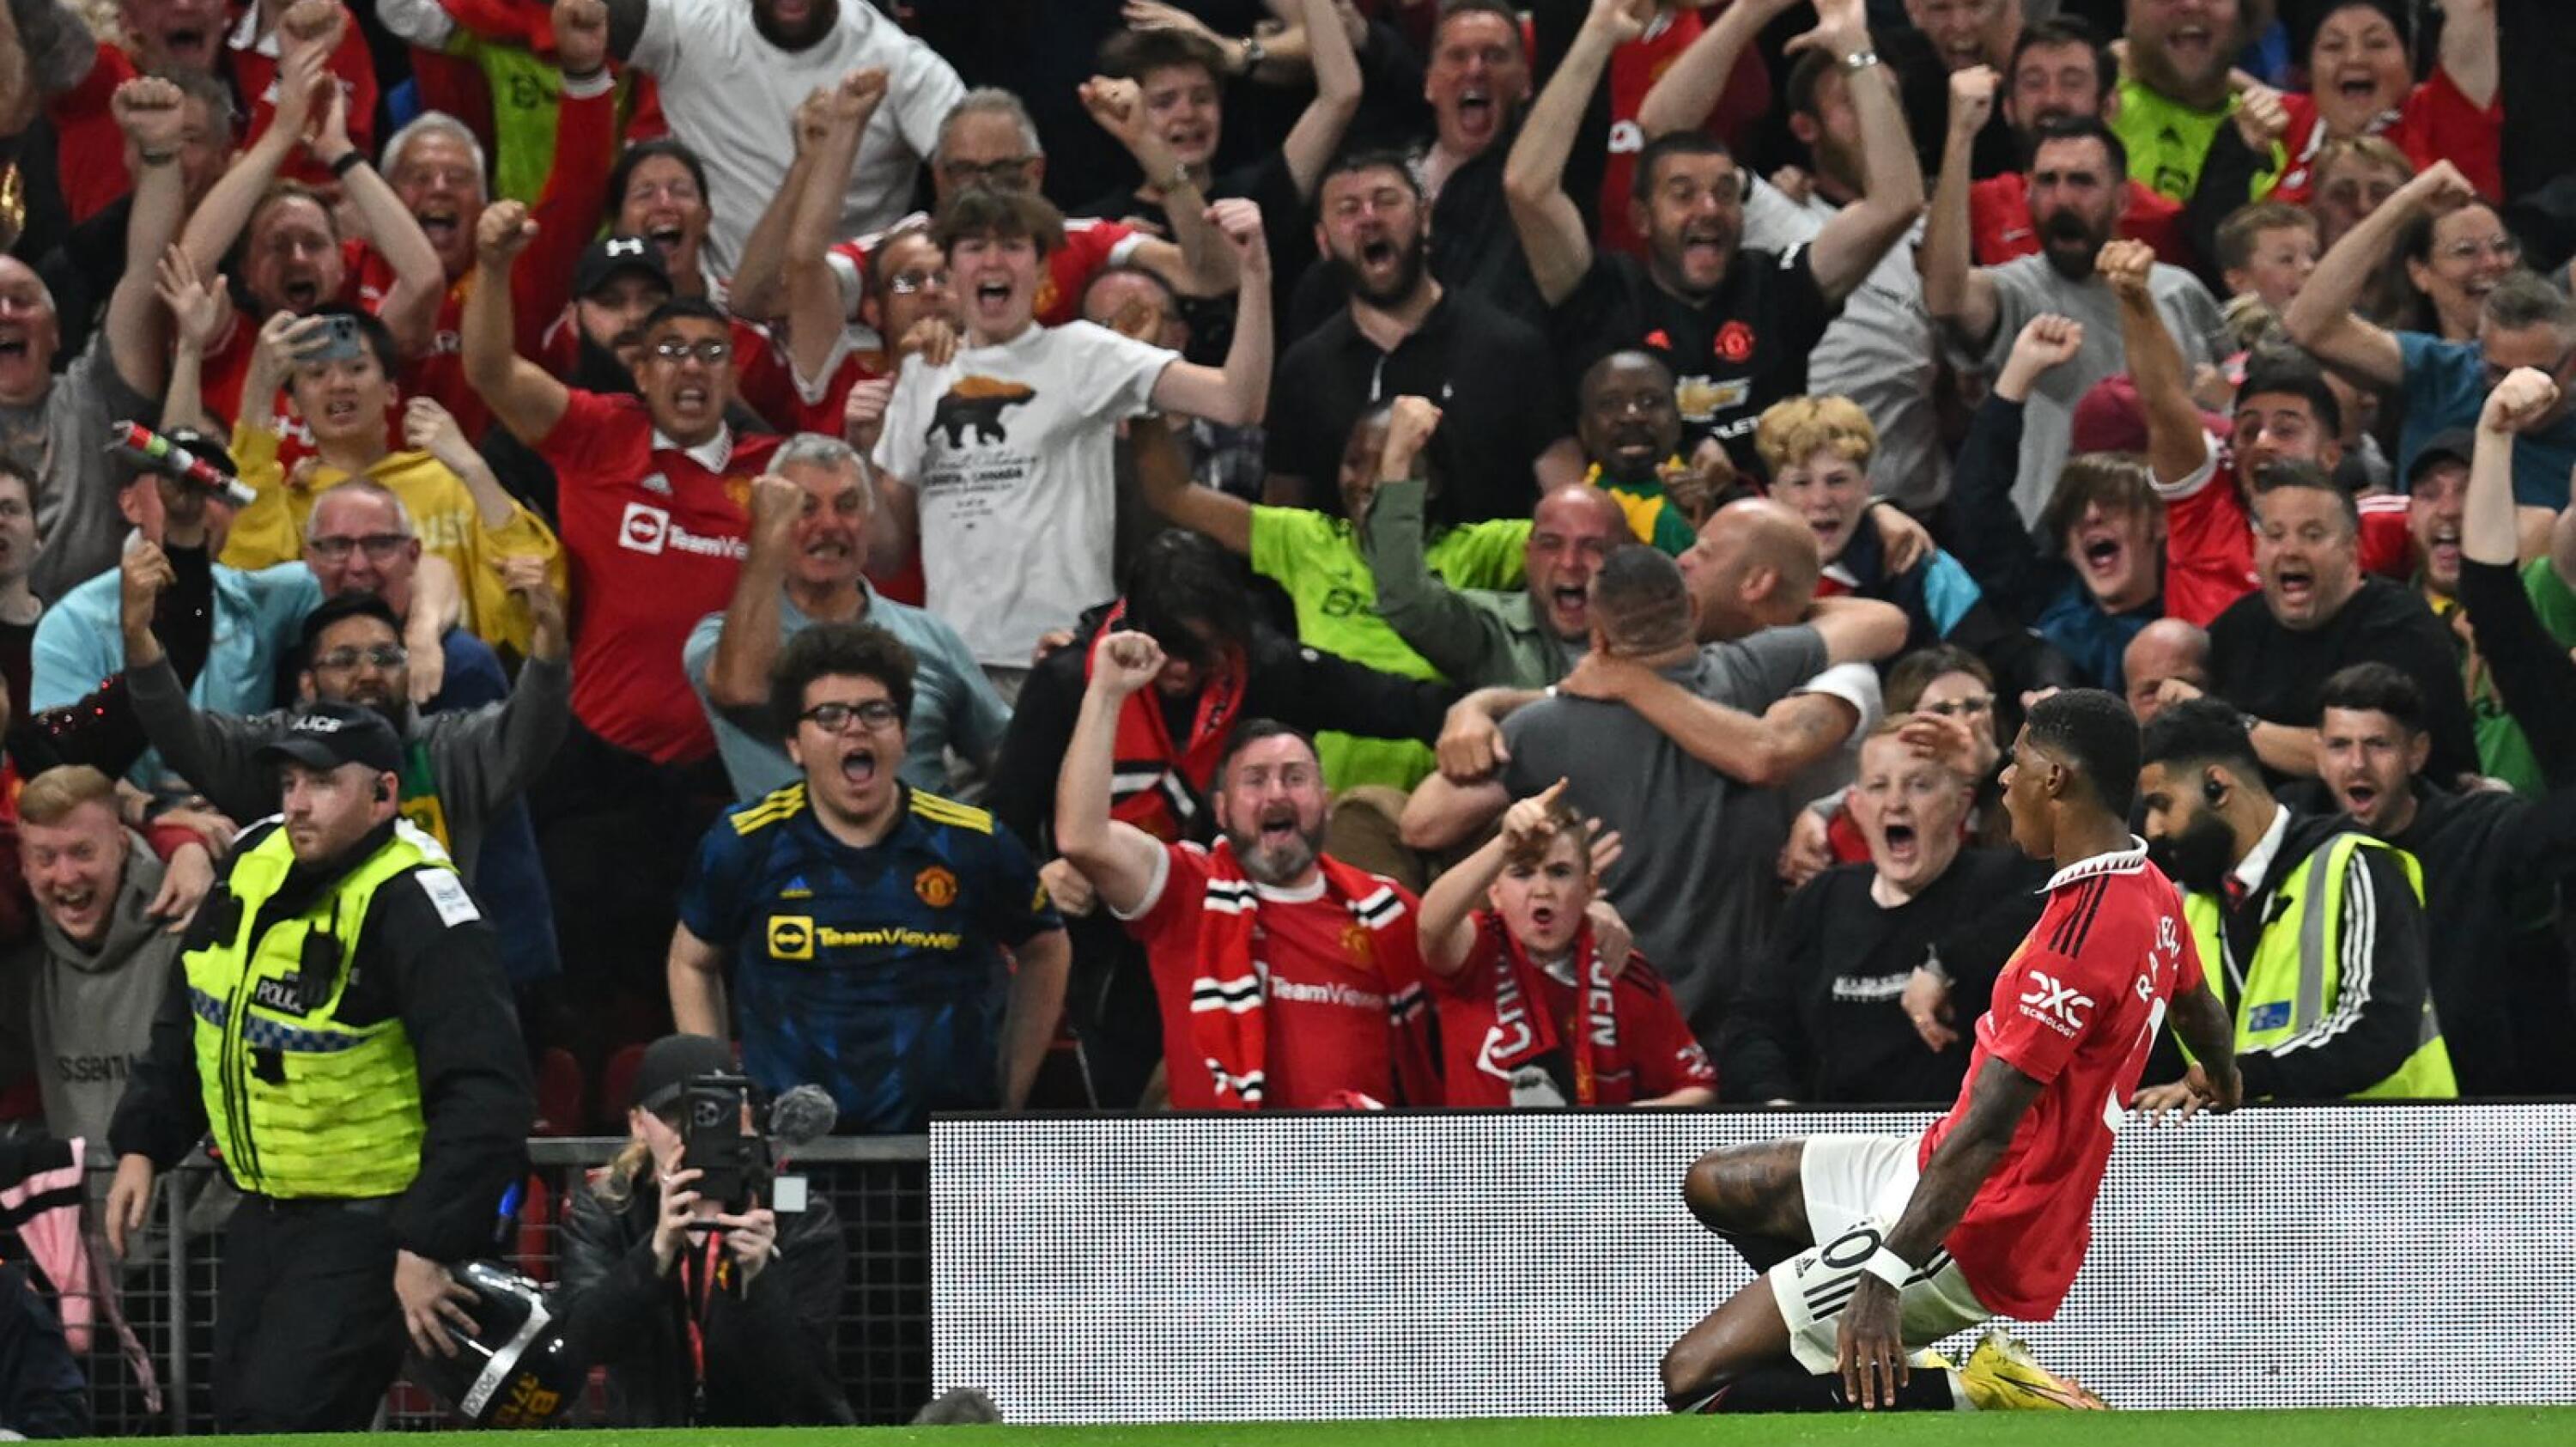 Manchester United's Marcus Rashford celebrates in front of supporters after scoring their second goal during their Premier League match against Liverpool at Old Trafford in Manchester on Monday